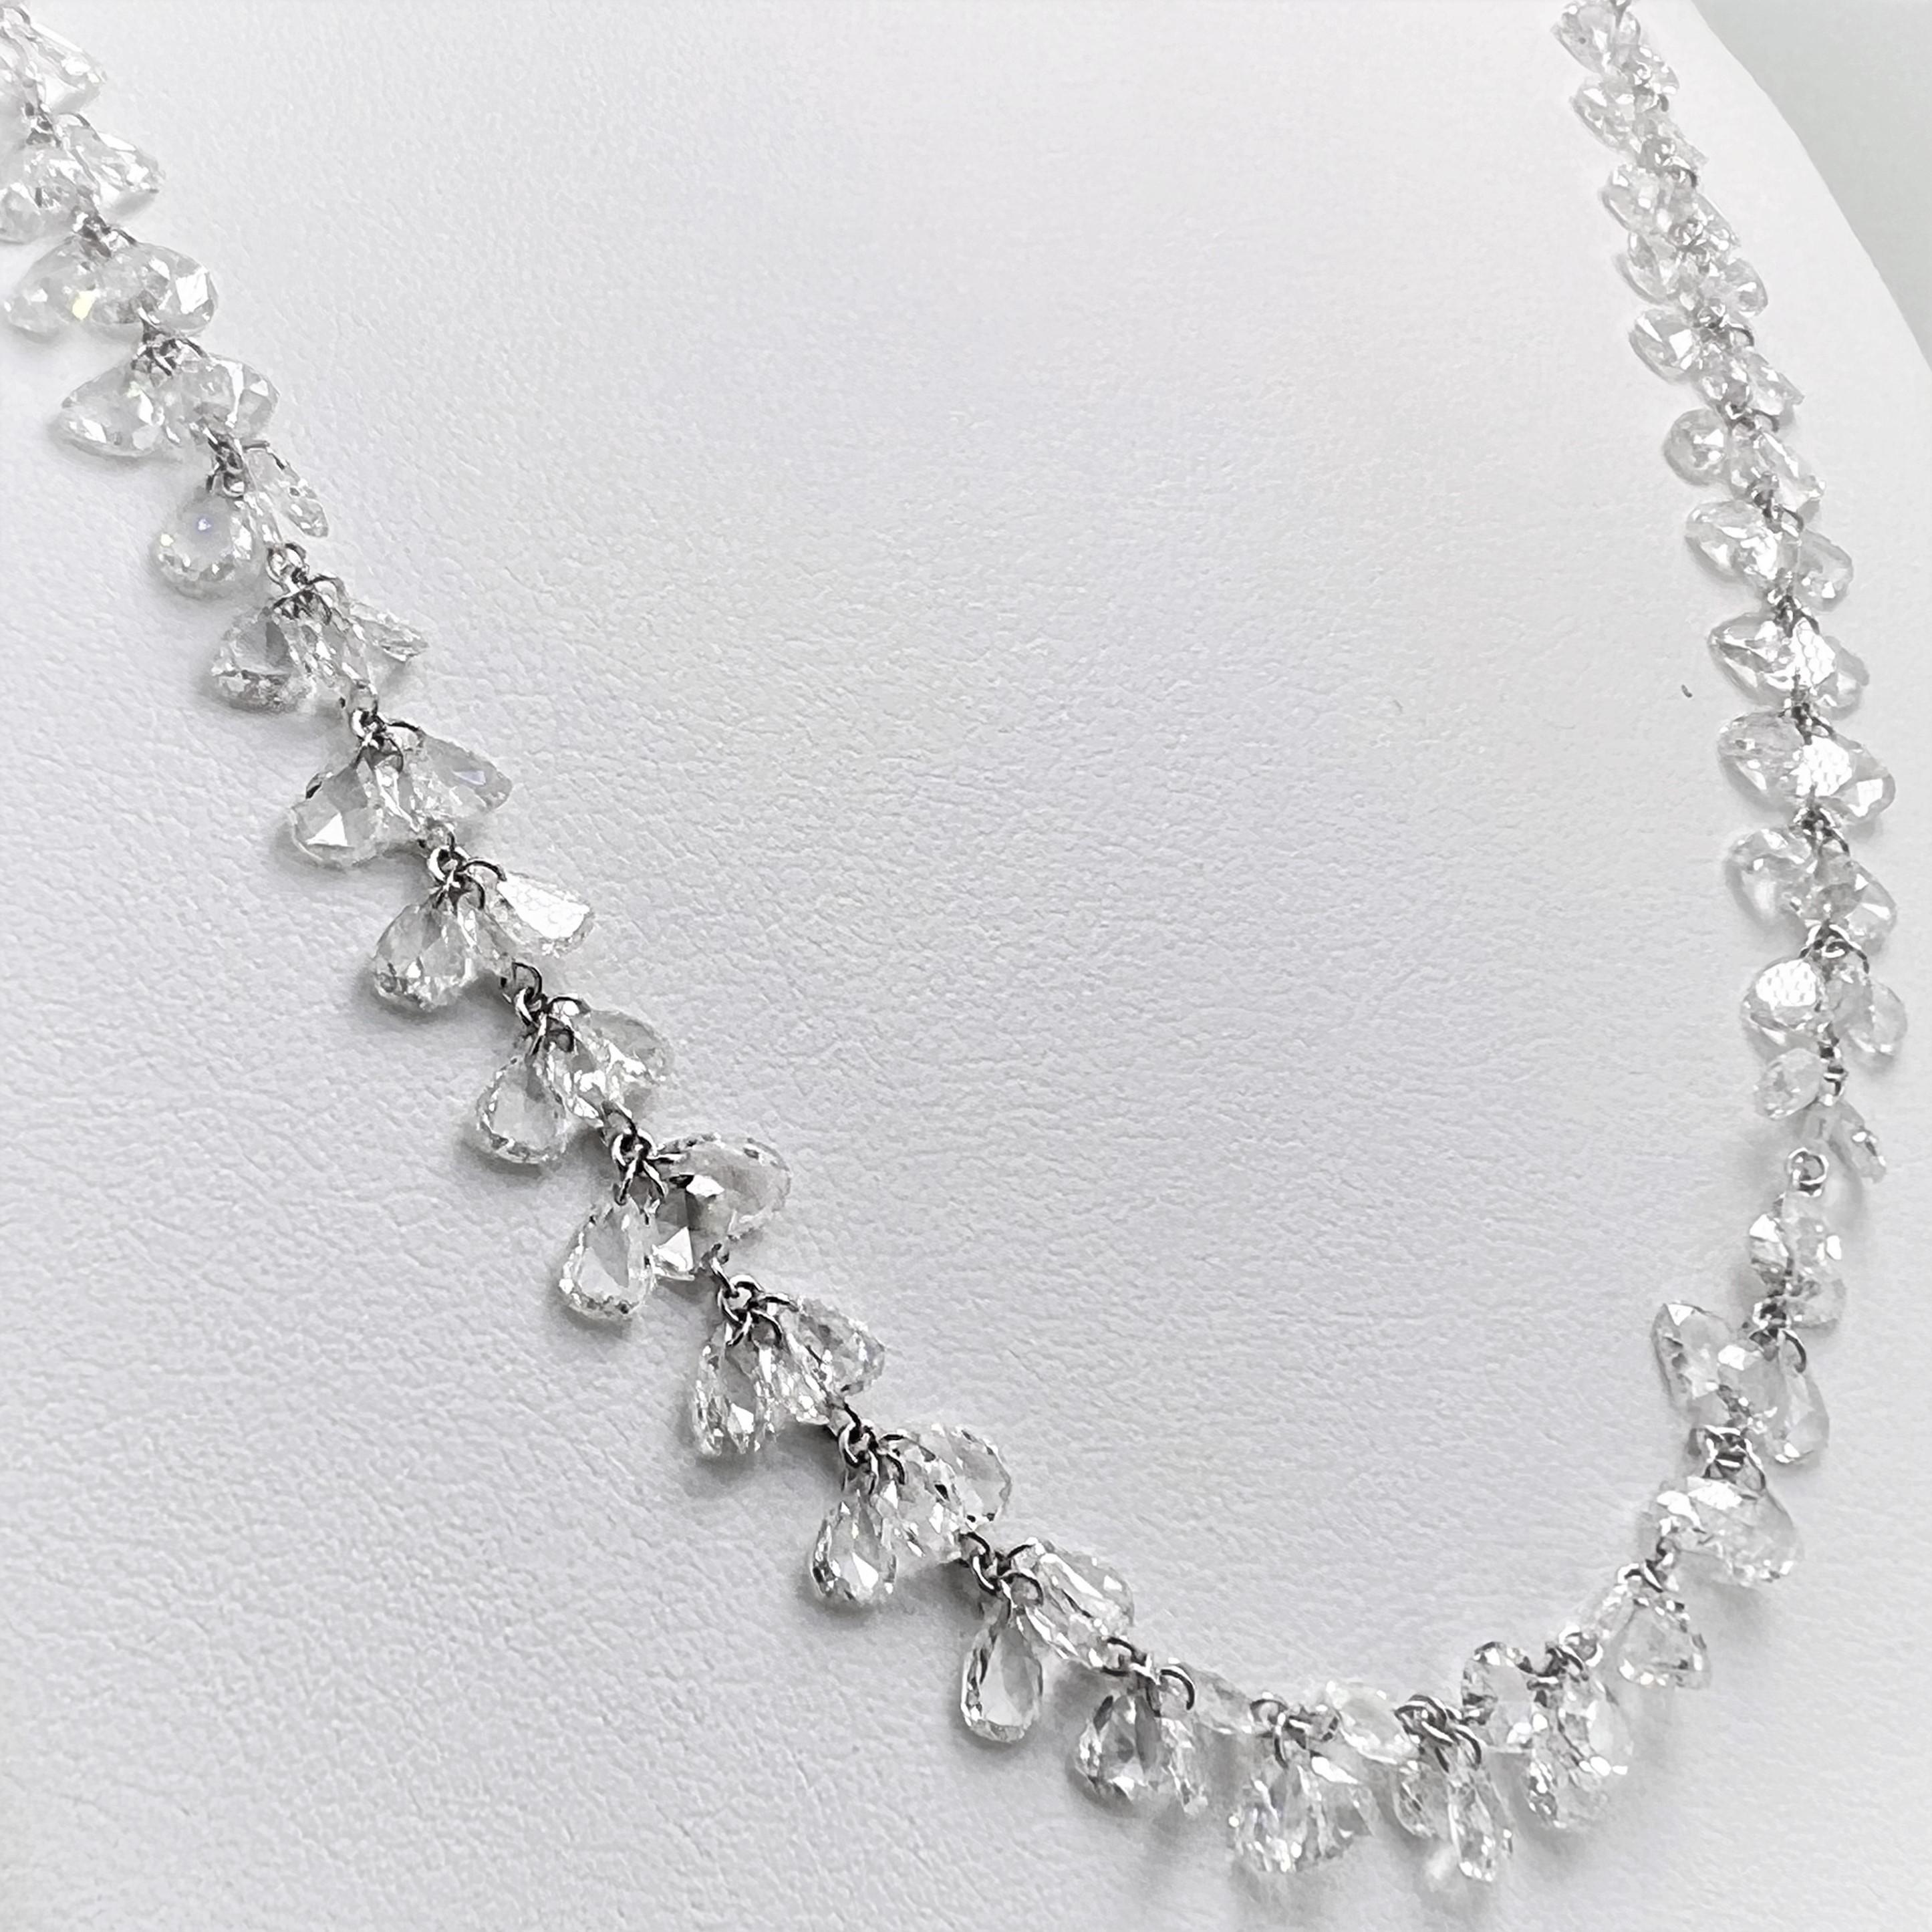 This is a timeless piece Rose Cut Diamond Necklace that has the ability to compliment anything you wear.  Embellished with 291 pieces of Rose cut and Round Brilliant cut diamonds weighing 28.05 carats in total, this gorgeous piece is a must to have